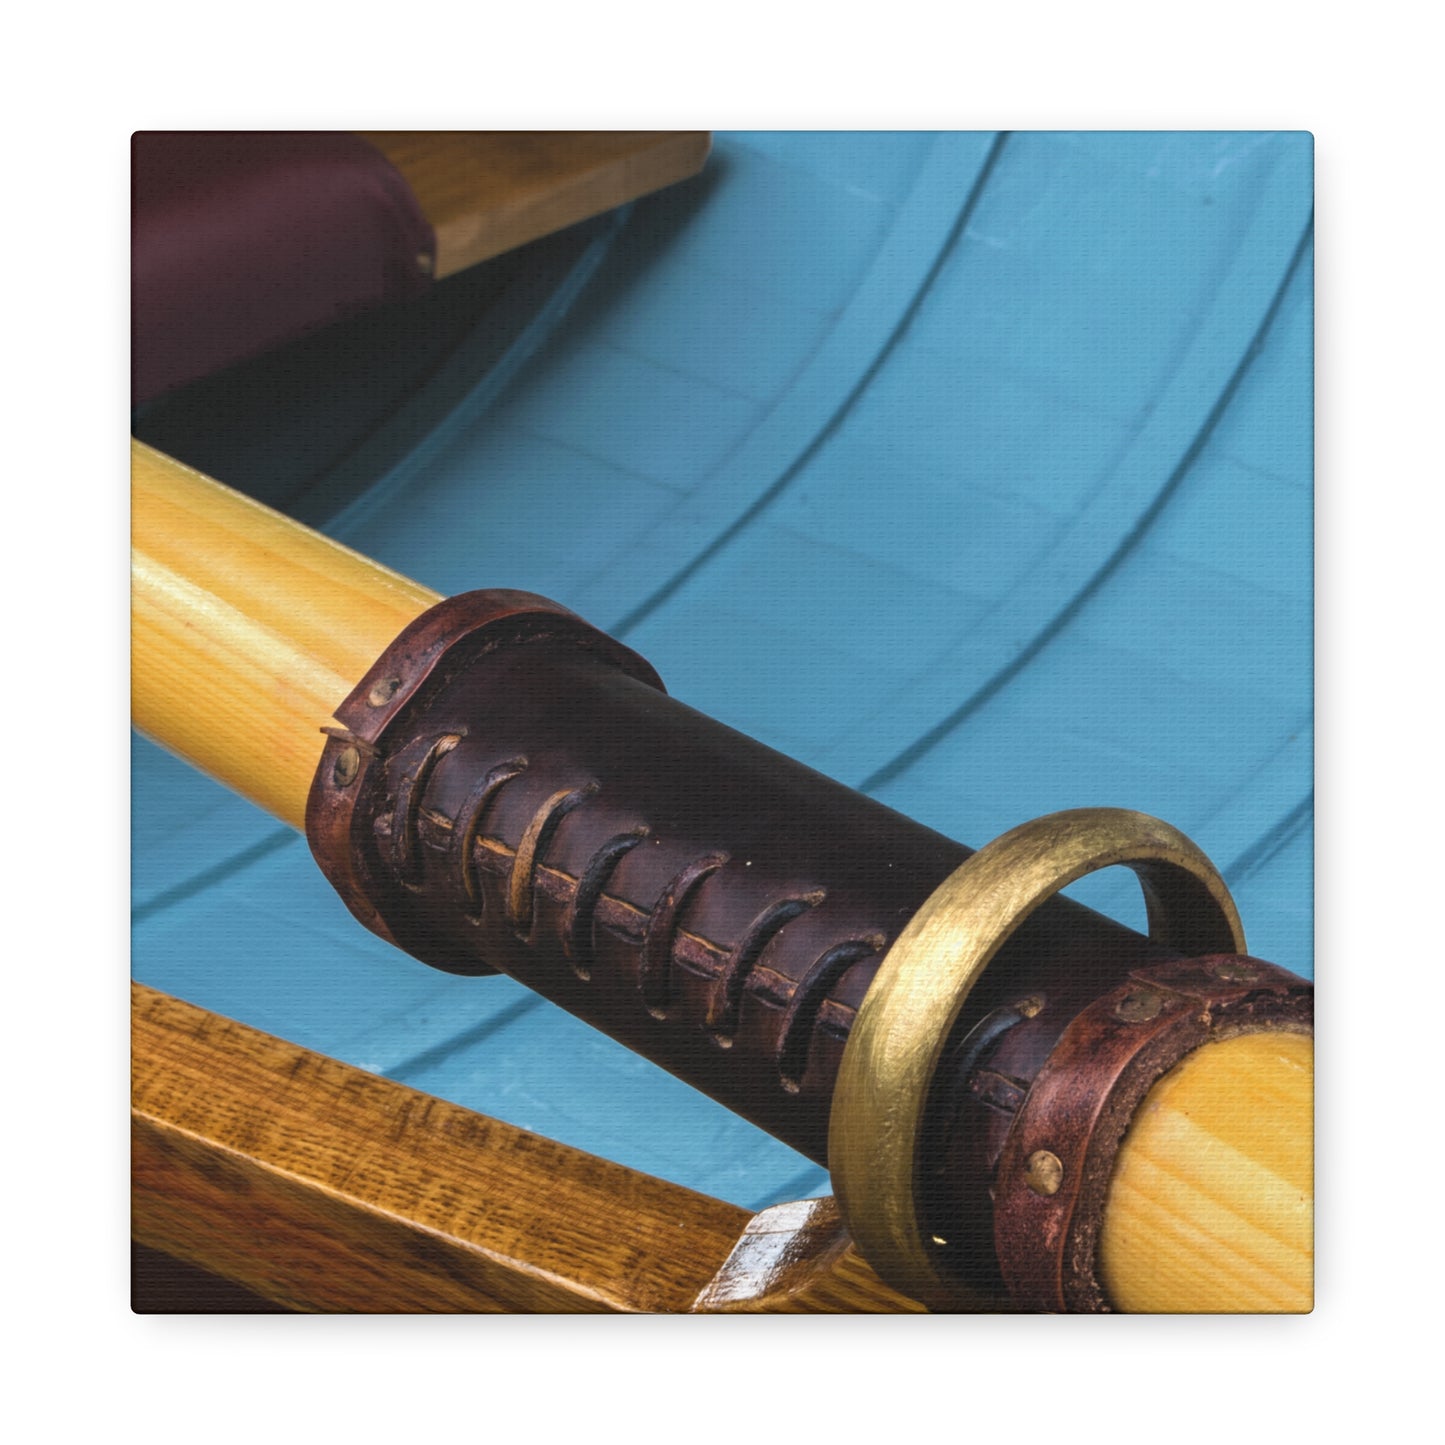 Boats 05 - Gallery Wrapped Canvas 10″ x 10″ Premium Gallery Wraps (1.25″)